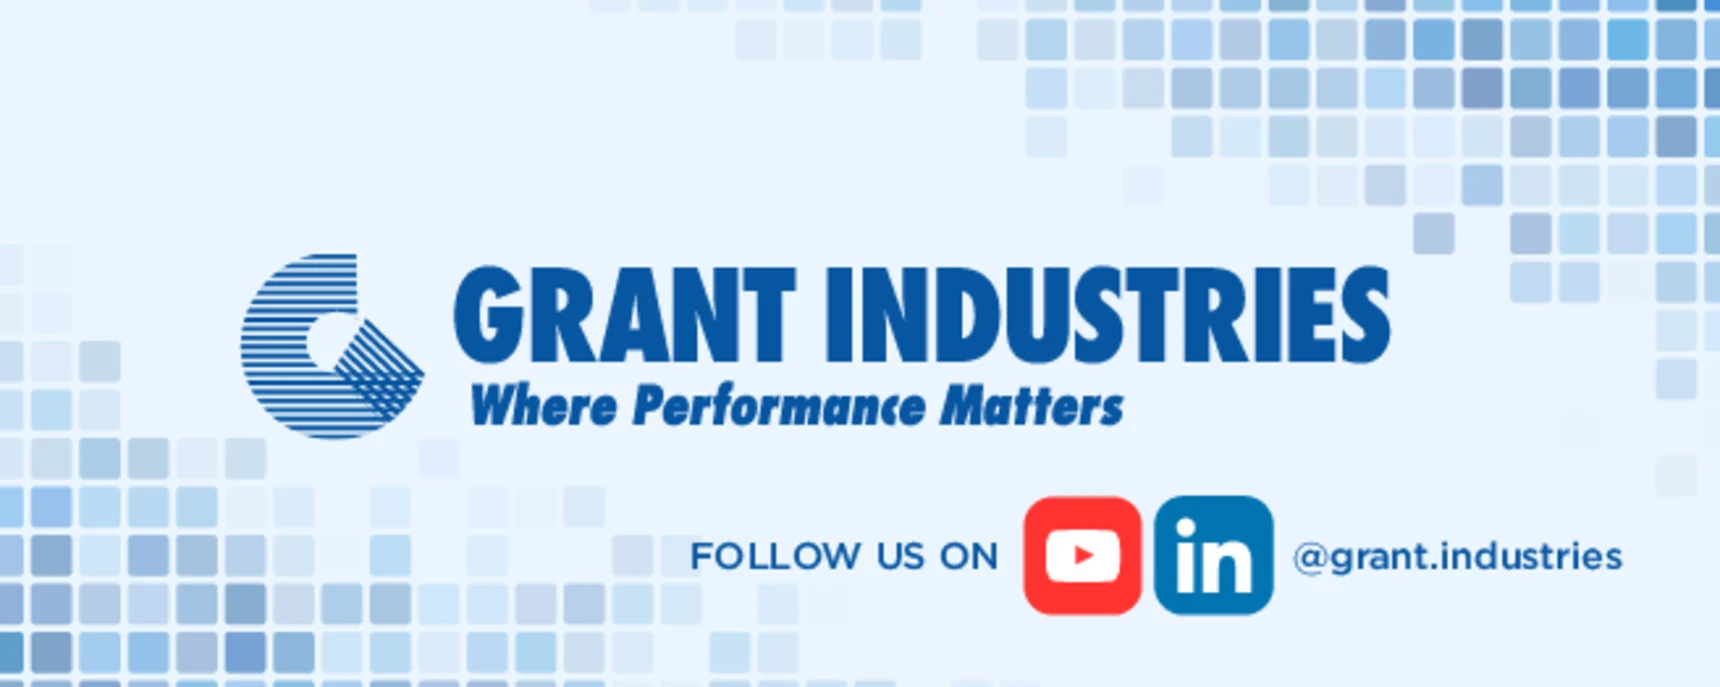 Grant Industries banner